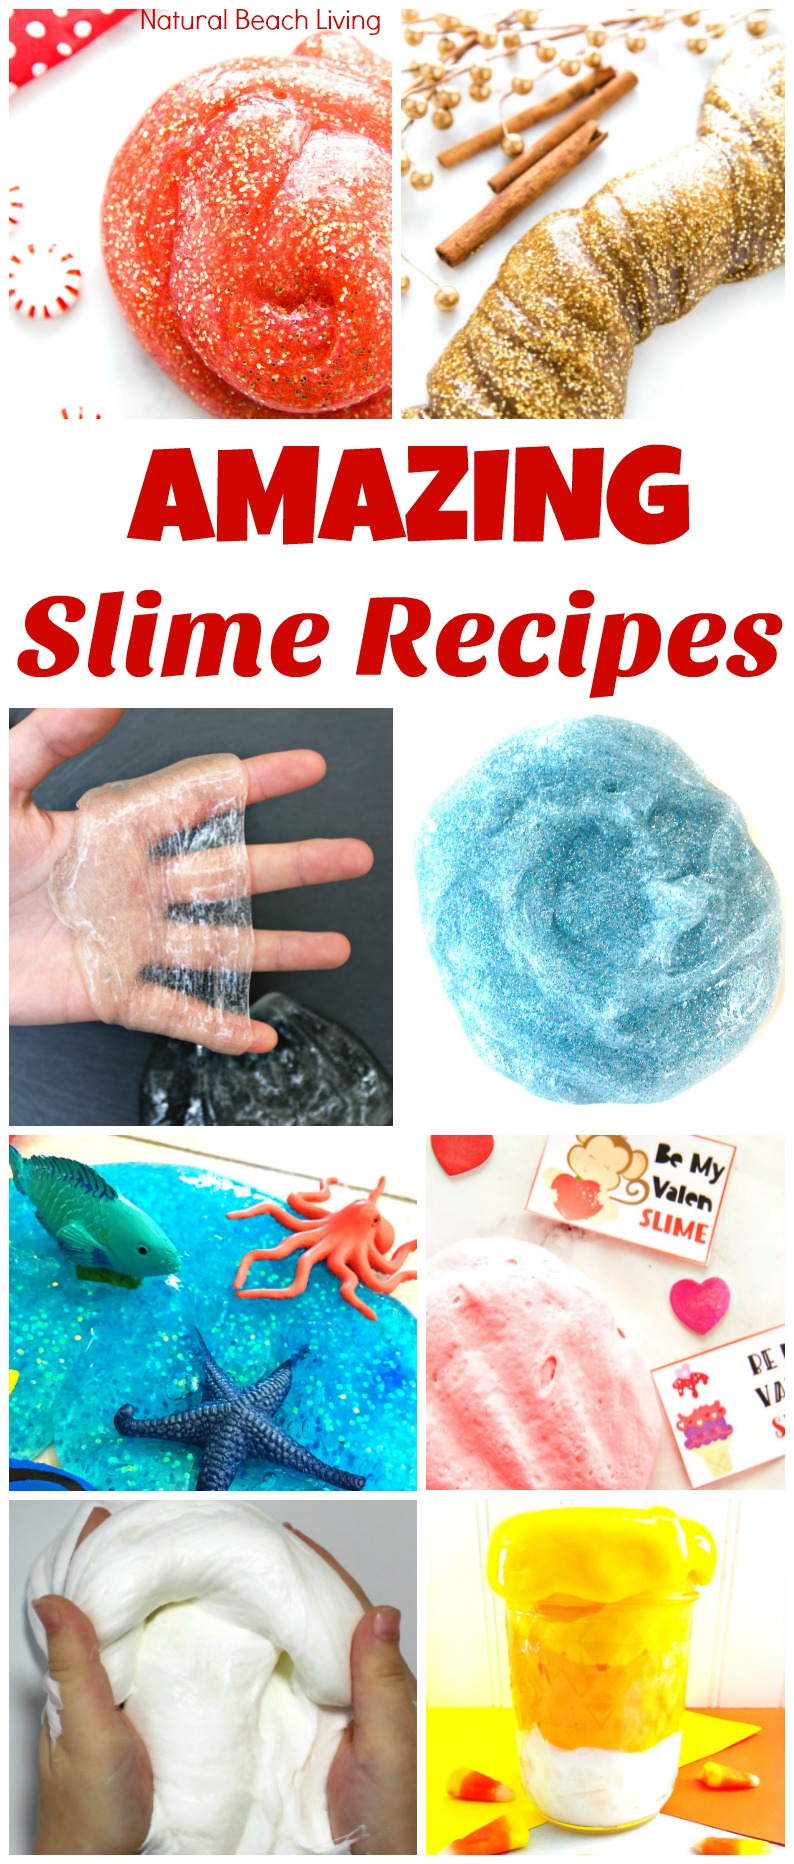 Edible Cranberry Fluffy Slime, This Marshmallow Fluffy Slime Recipe is an easy to make no cook slime dough. Make a batch of homemade cranberry slime with only 4 ingredients, Edible Slime Recipe for Christmas